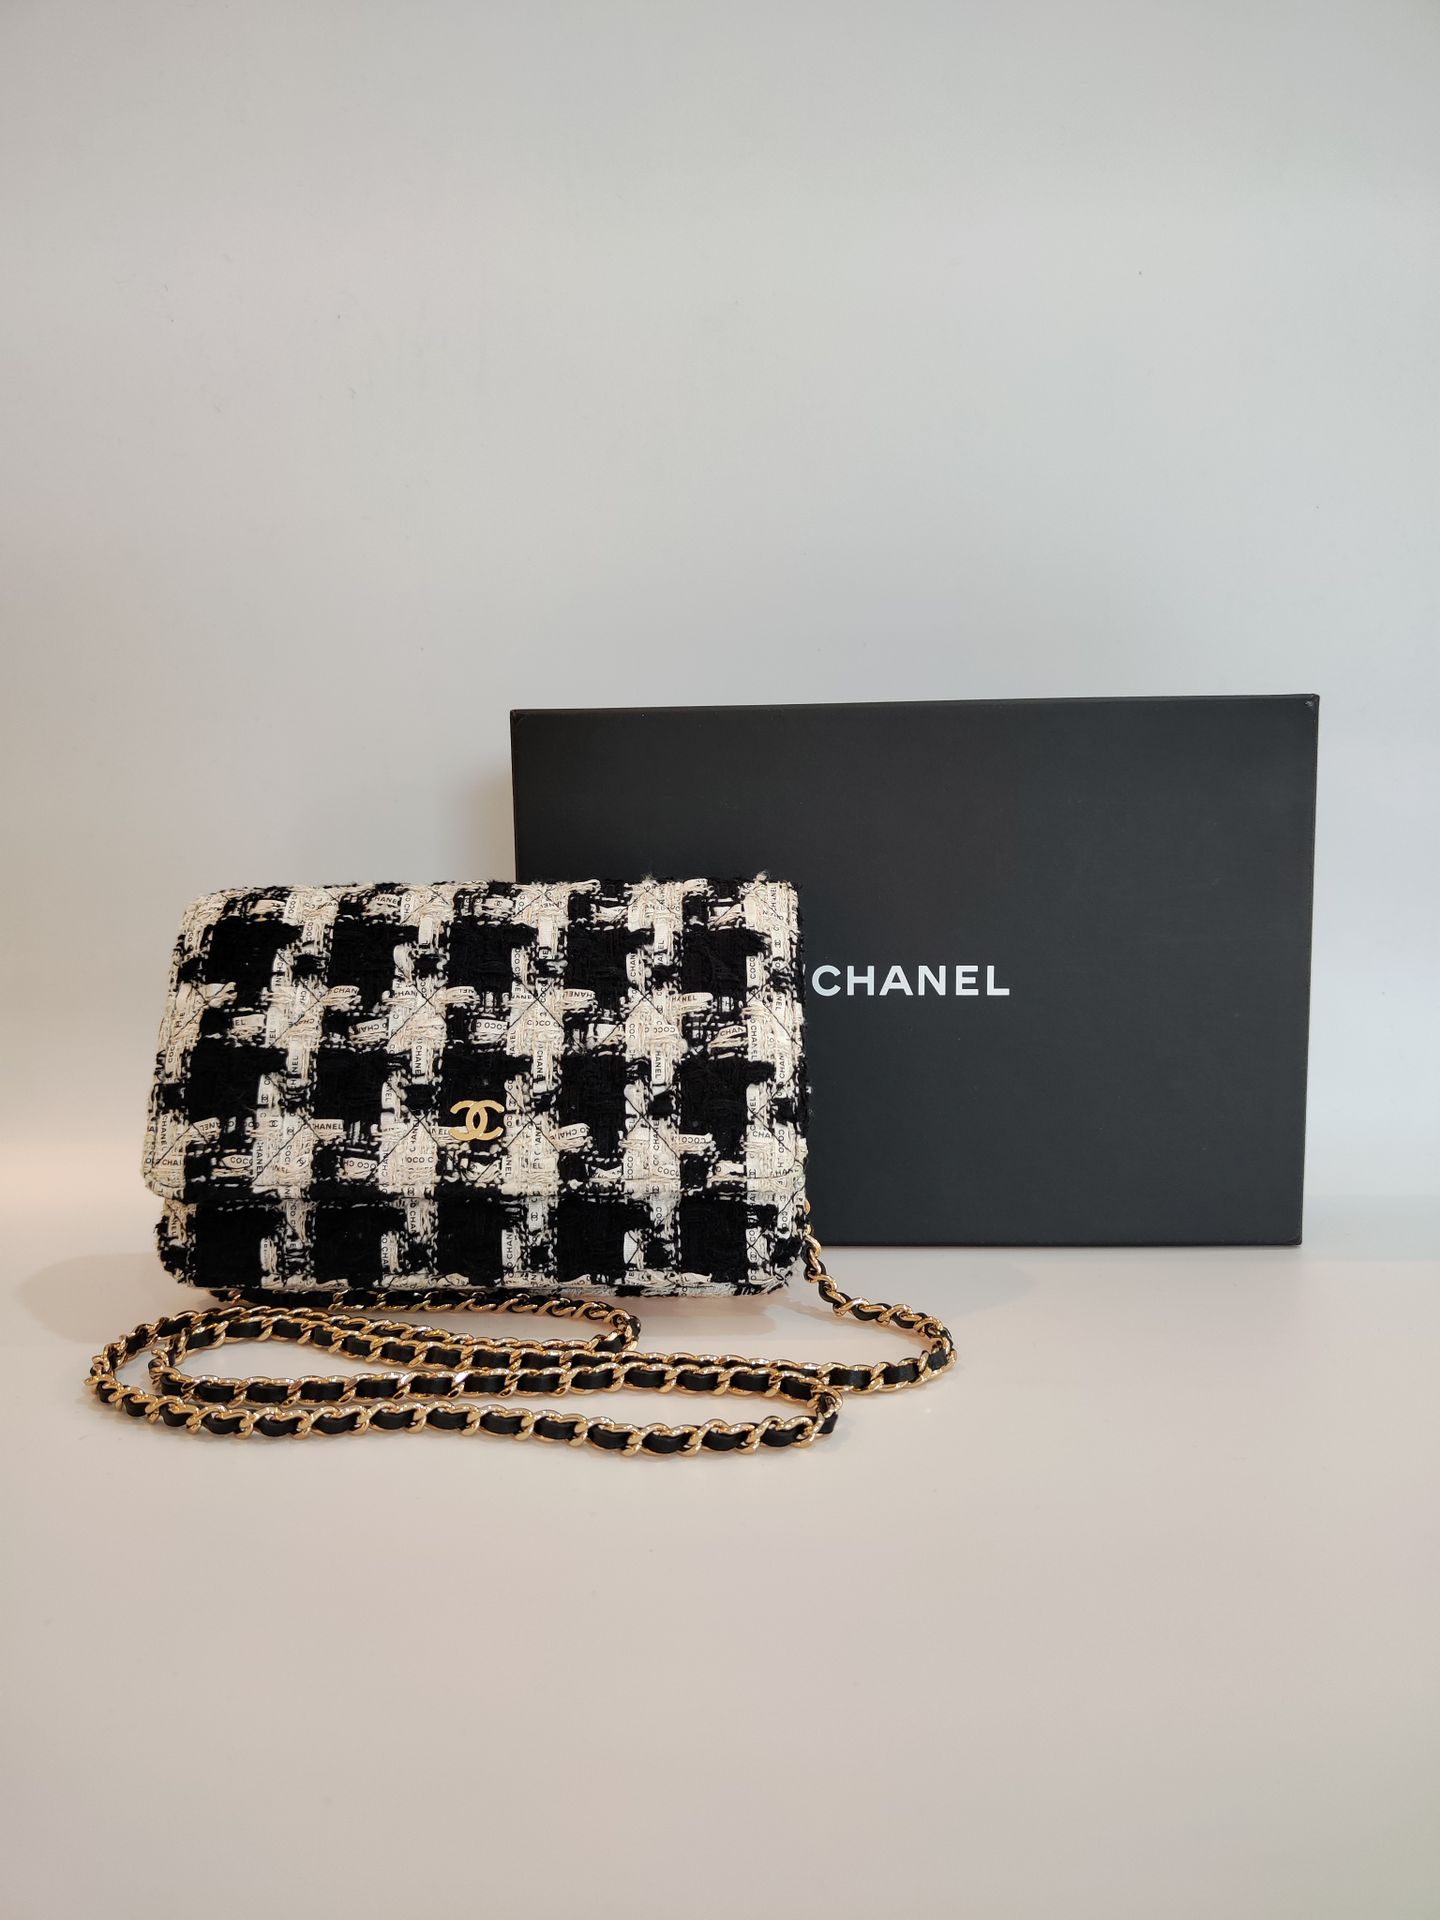 Null **CHANEL.
Wallet on chain clutch bag, in black and white tweed and ribbons &hellip;